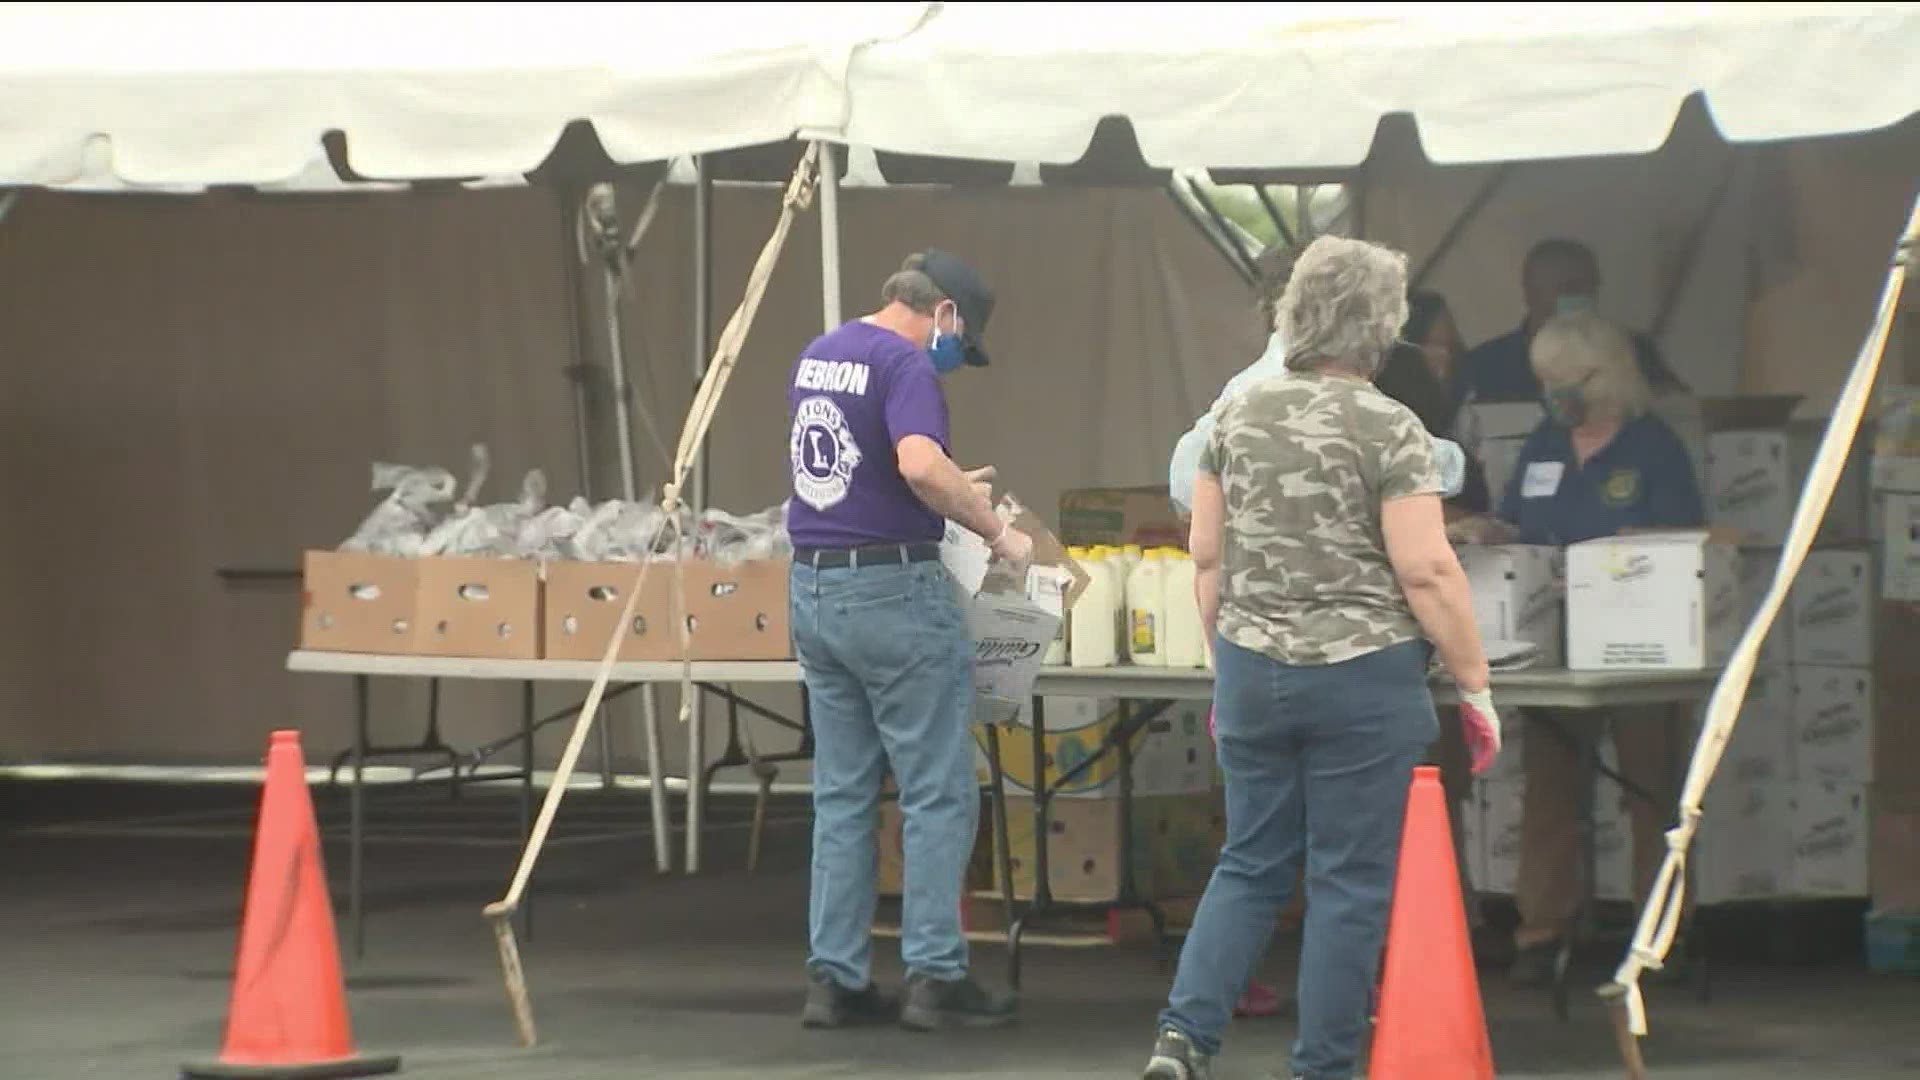 What was initially started as a week-long distribution event for food has now spanned several weeks.